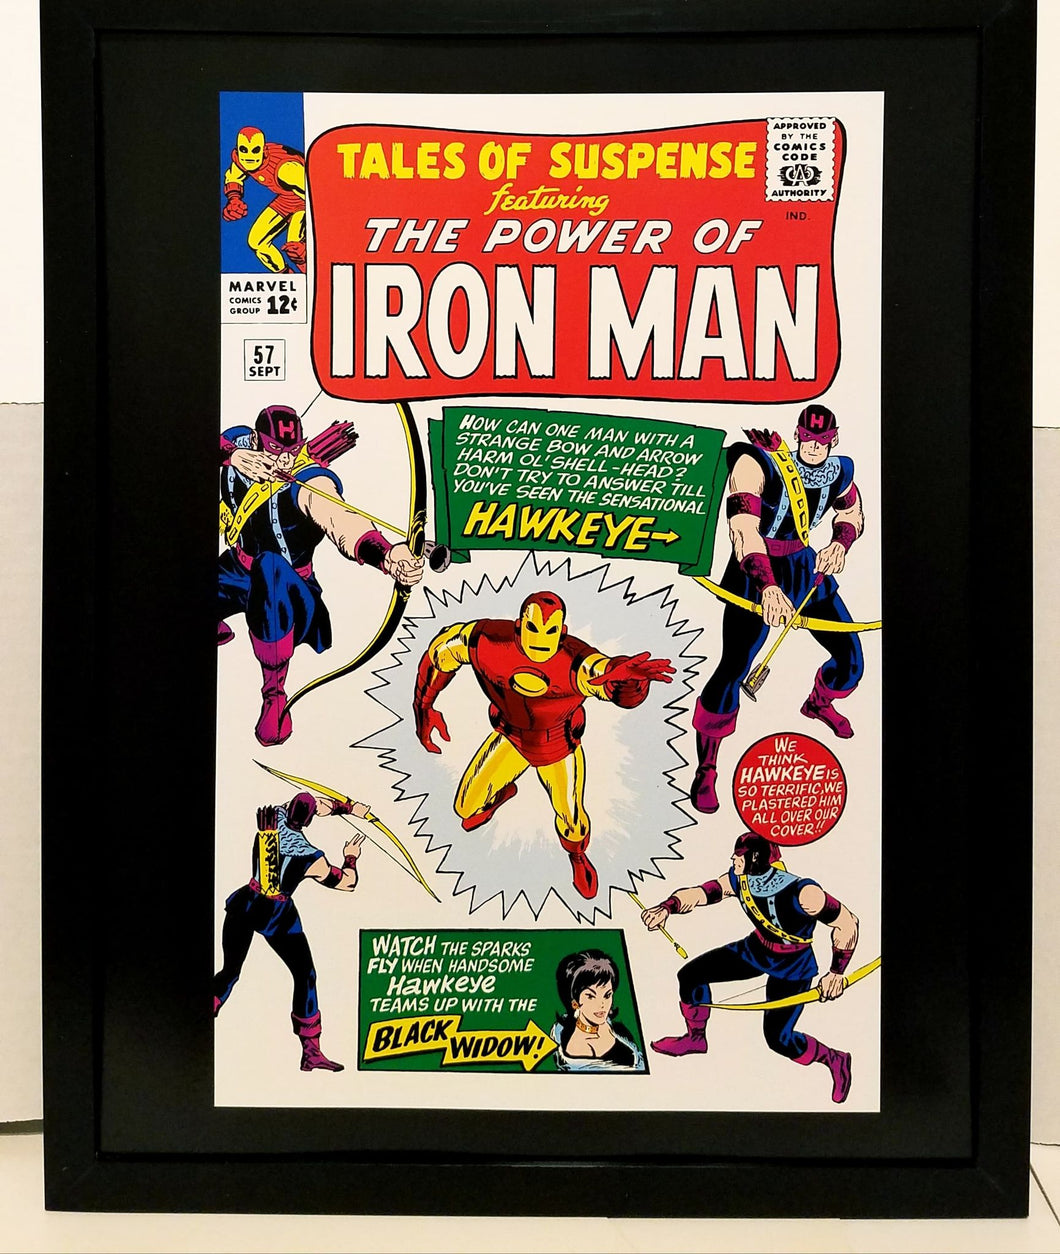 Tales of Suspense #57 by Don Heck 11x14 FRAMED Marvel Comics Art Print Poster